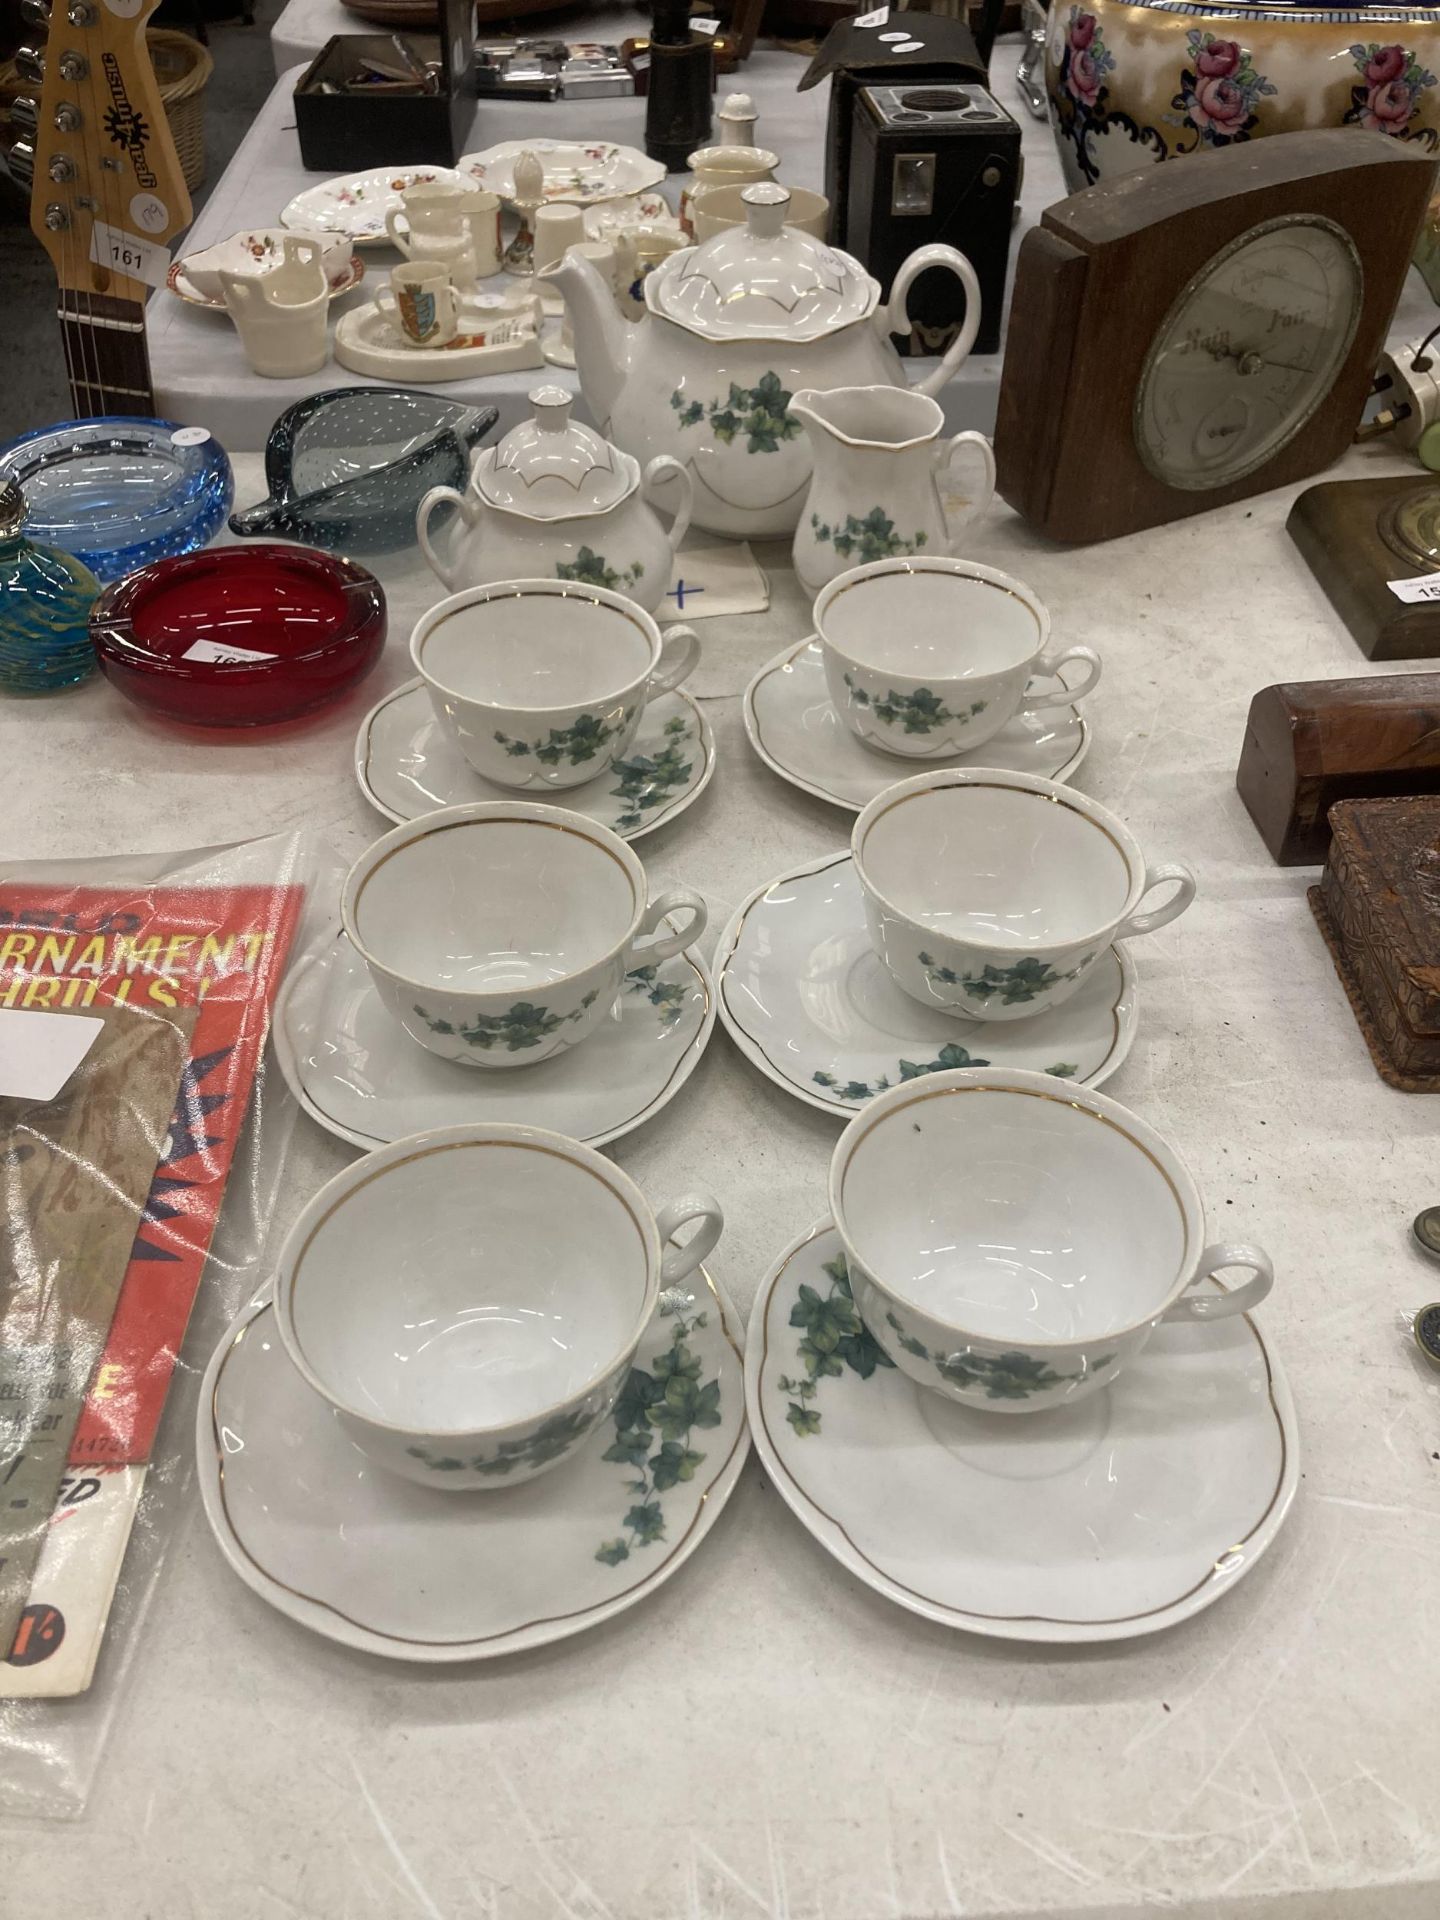 A FIESTA TEASET TO INCLUDE A TEAPOT, SUGAR BOWL, CREAM JUG, SIX CUPS AND SAUCERS